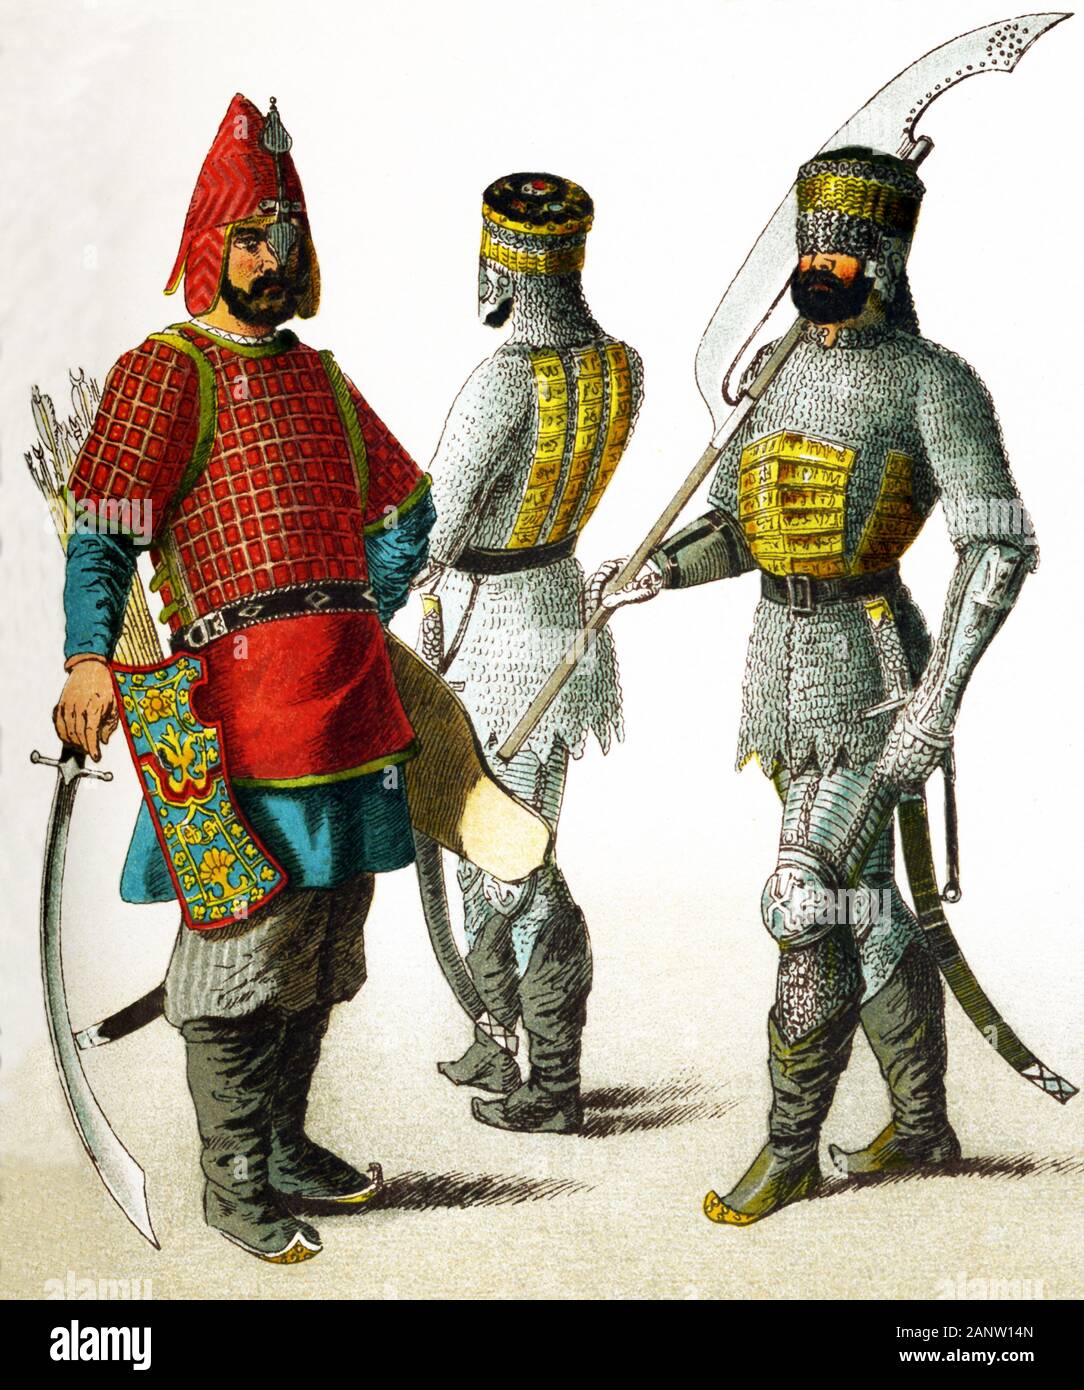 The figures here represent Slavonic warriors in A.D. 1400. They are, from left to right: three Russian warriors. The illustration dates to 1882. Stock Photo